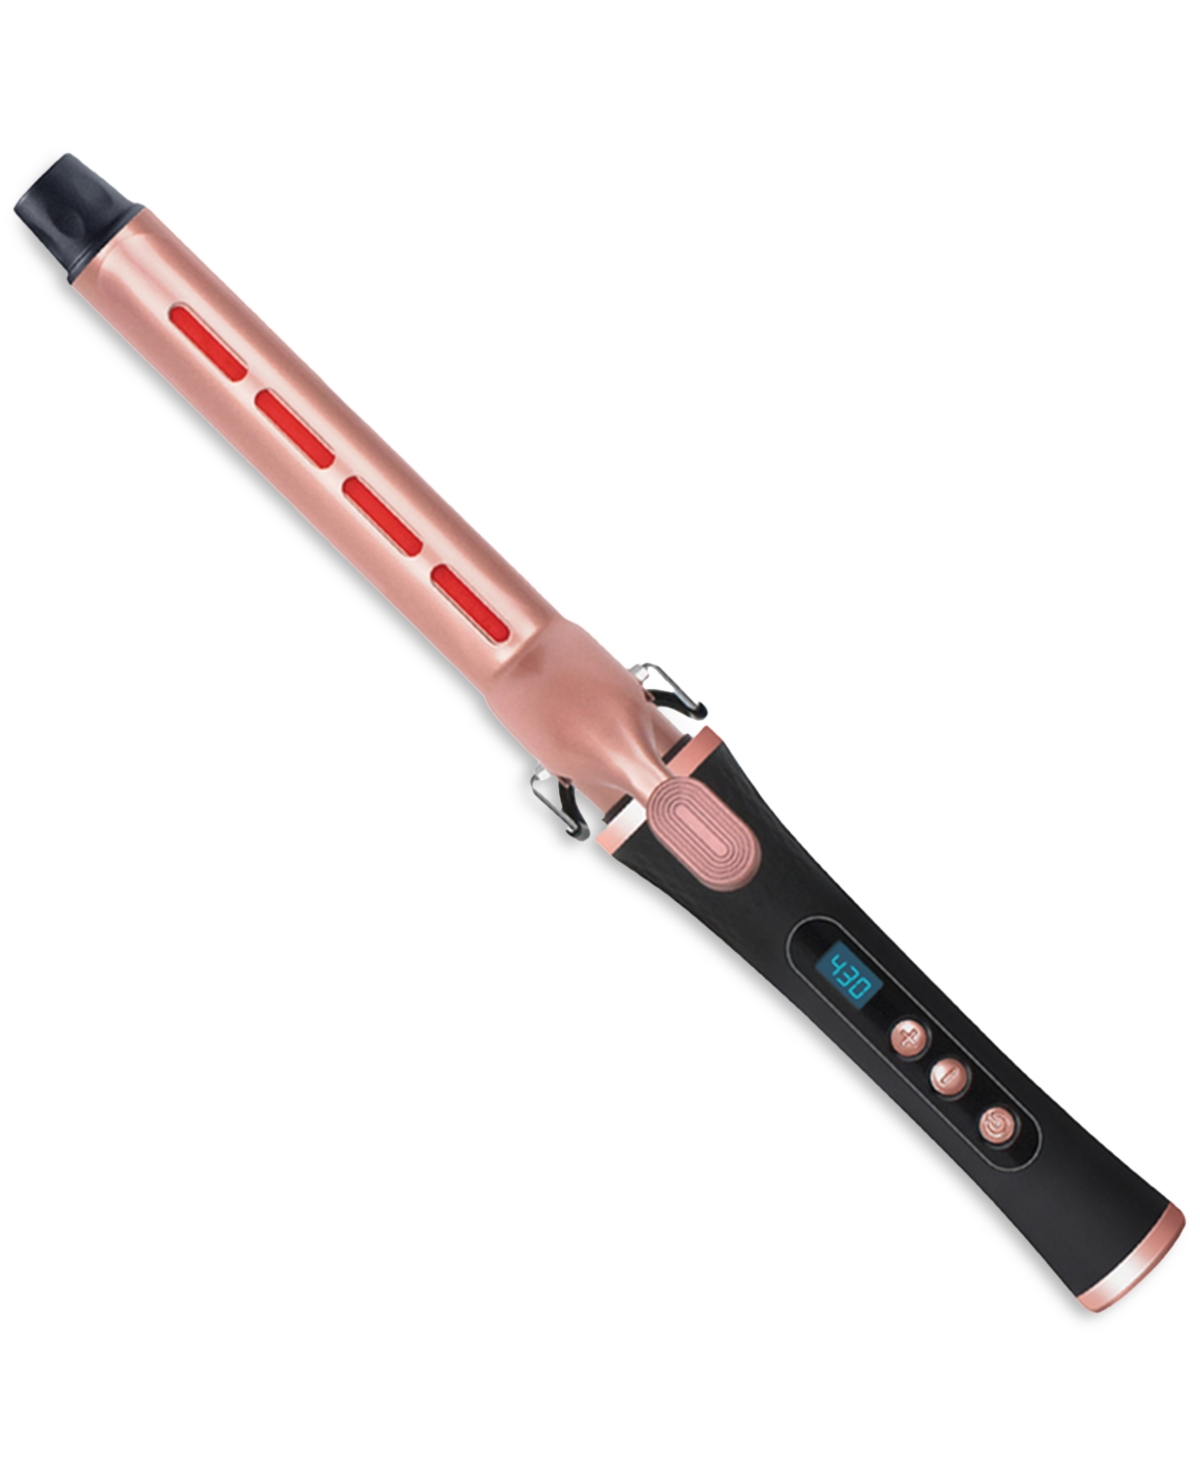 Sutra Beauty Ir2 Infrared Curling Iron In Black And Rose Gold